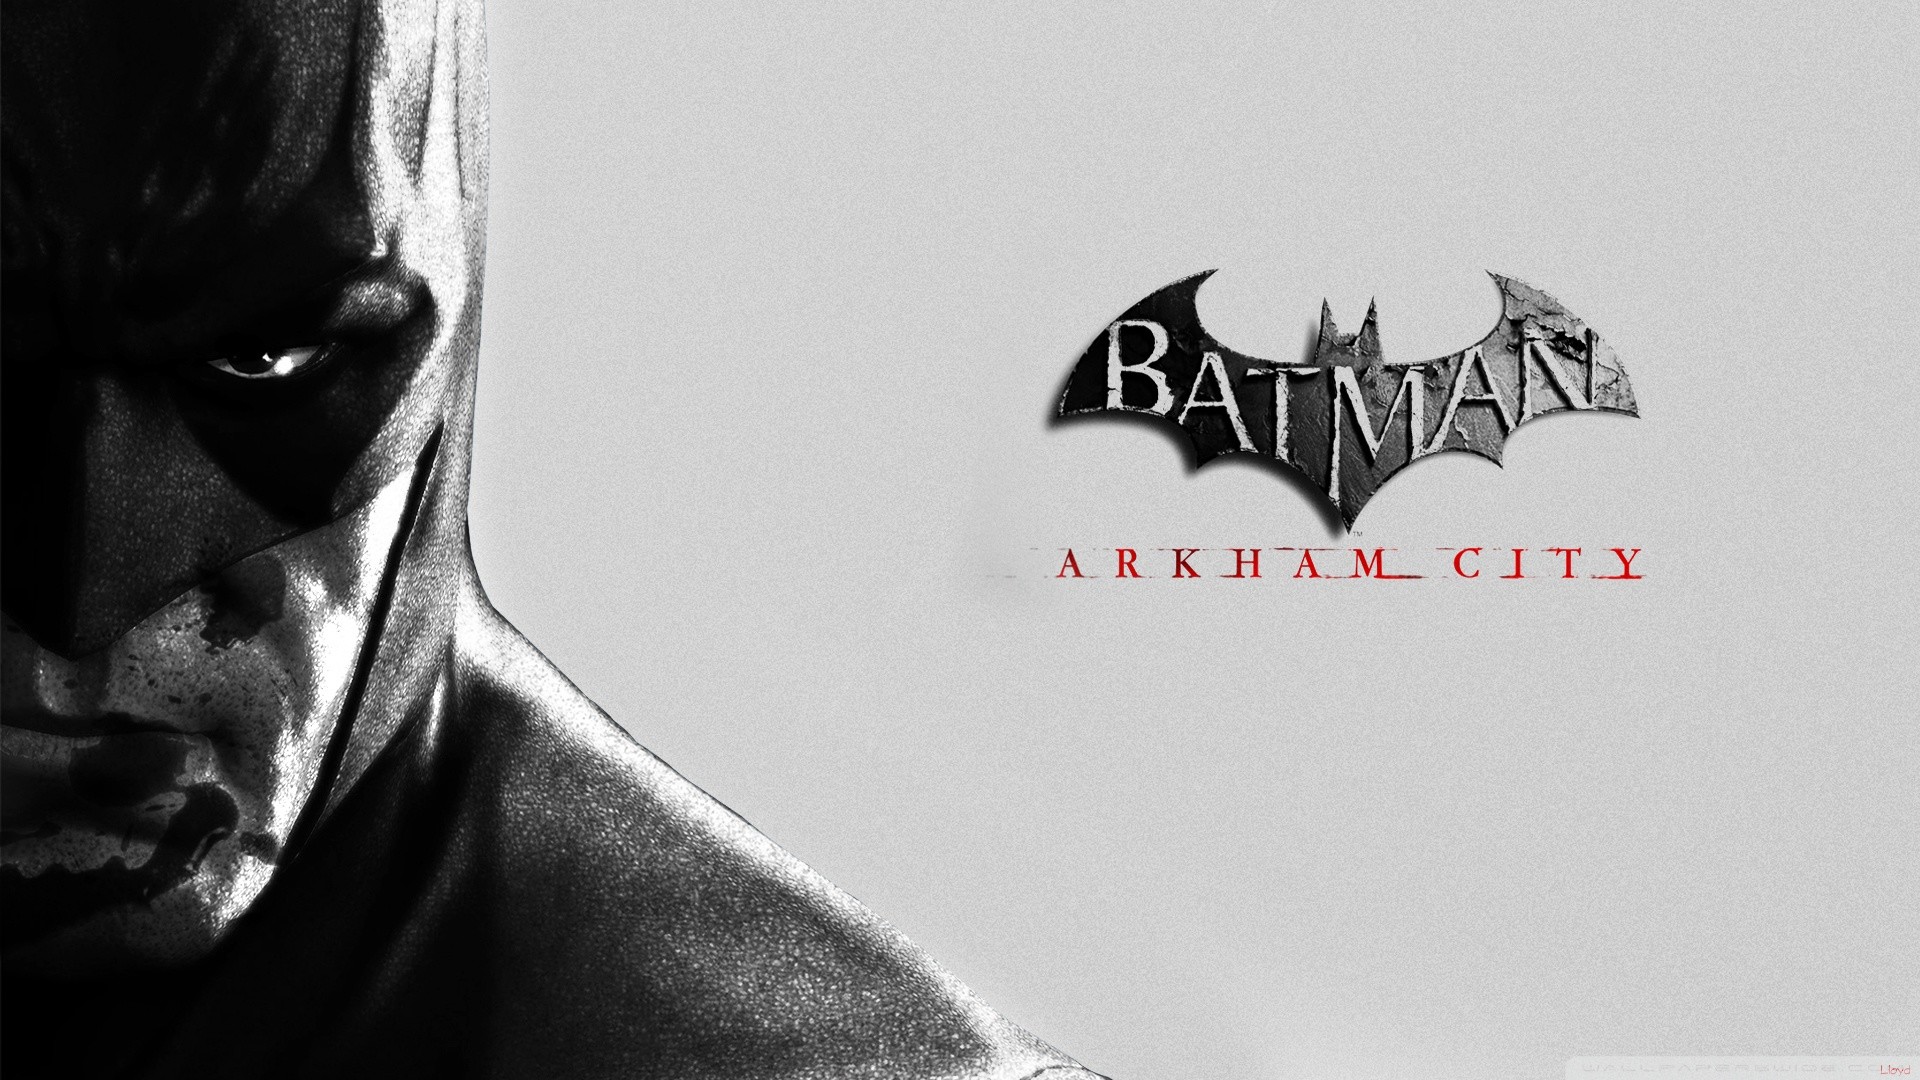 Promotional Artwork  Pictures  Characters Art  Batman Arkham City  Batman  arkham city Arkham city Batman wallpaper